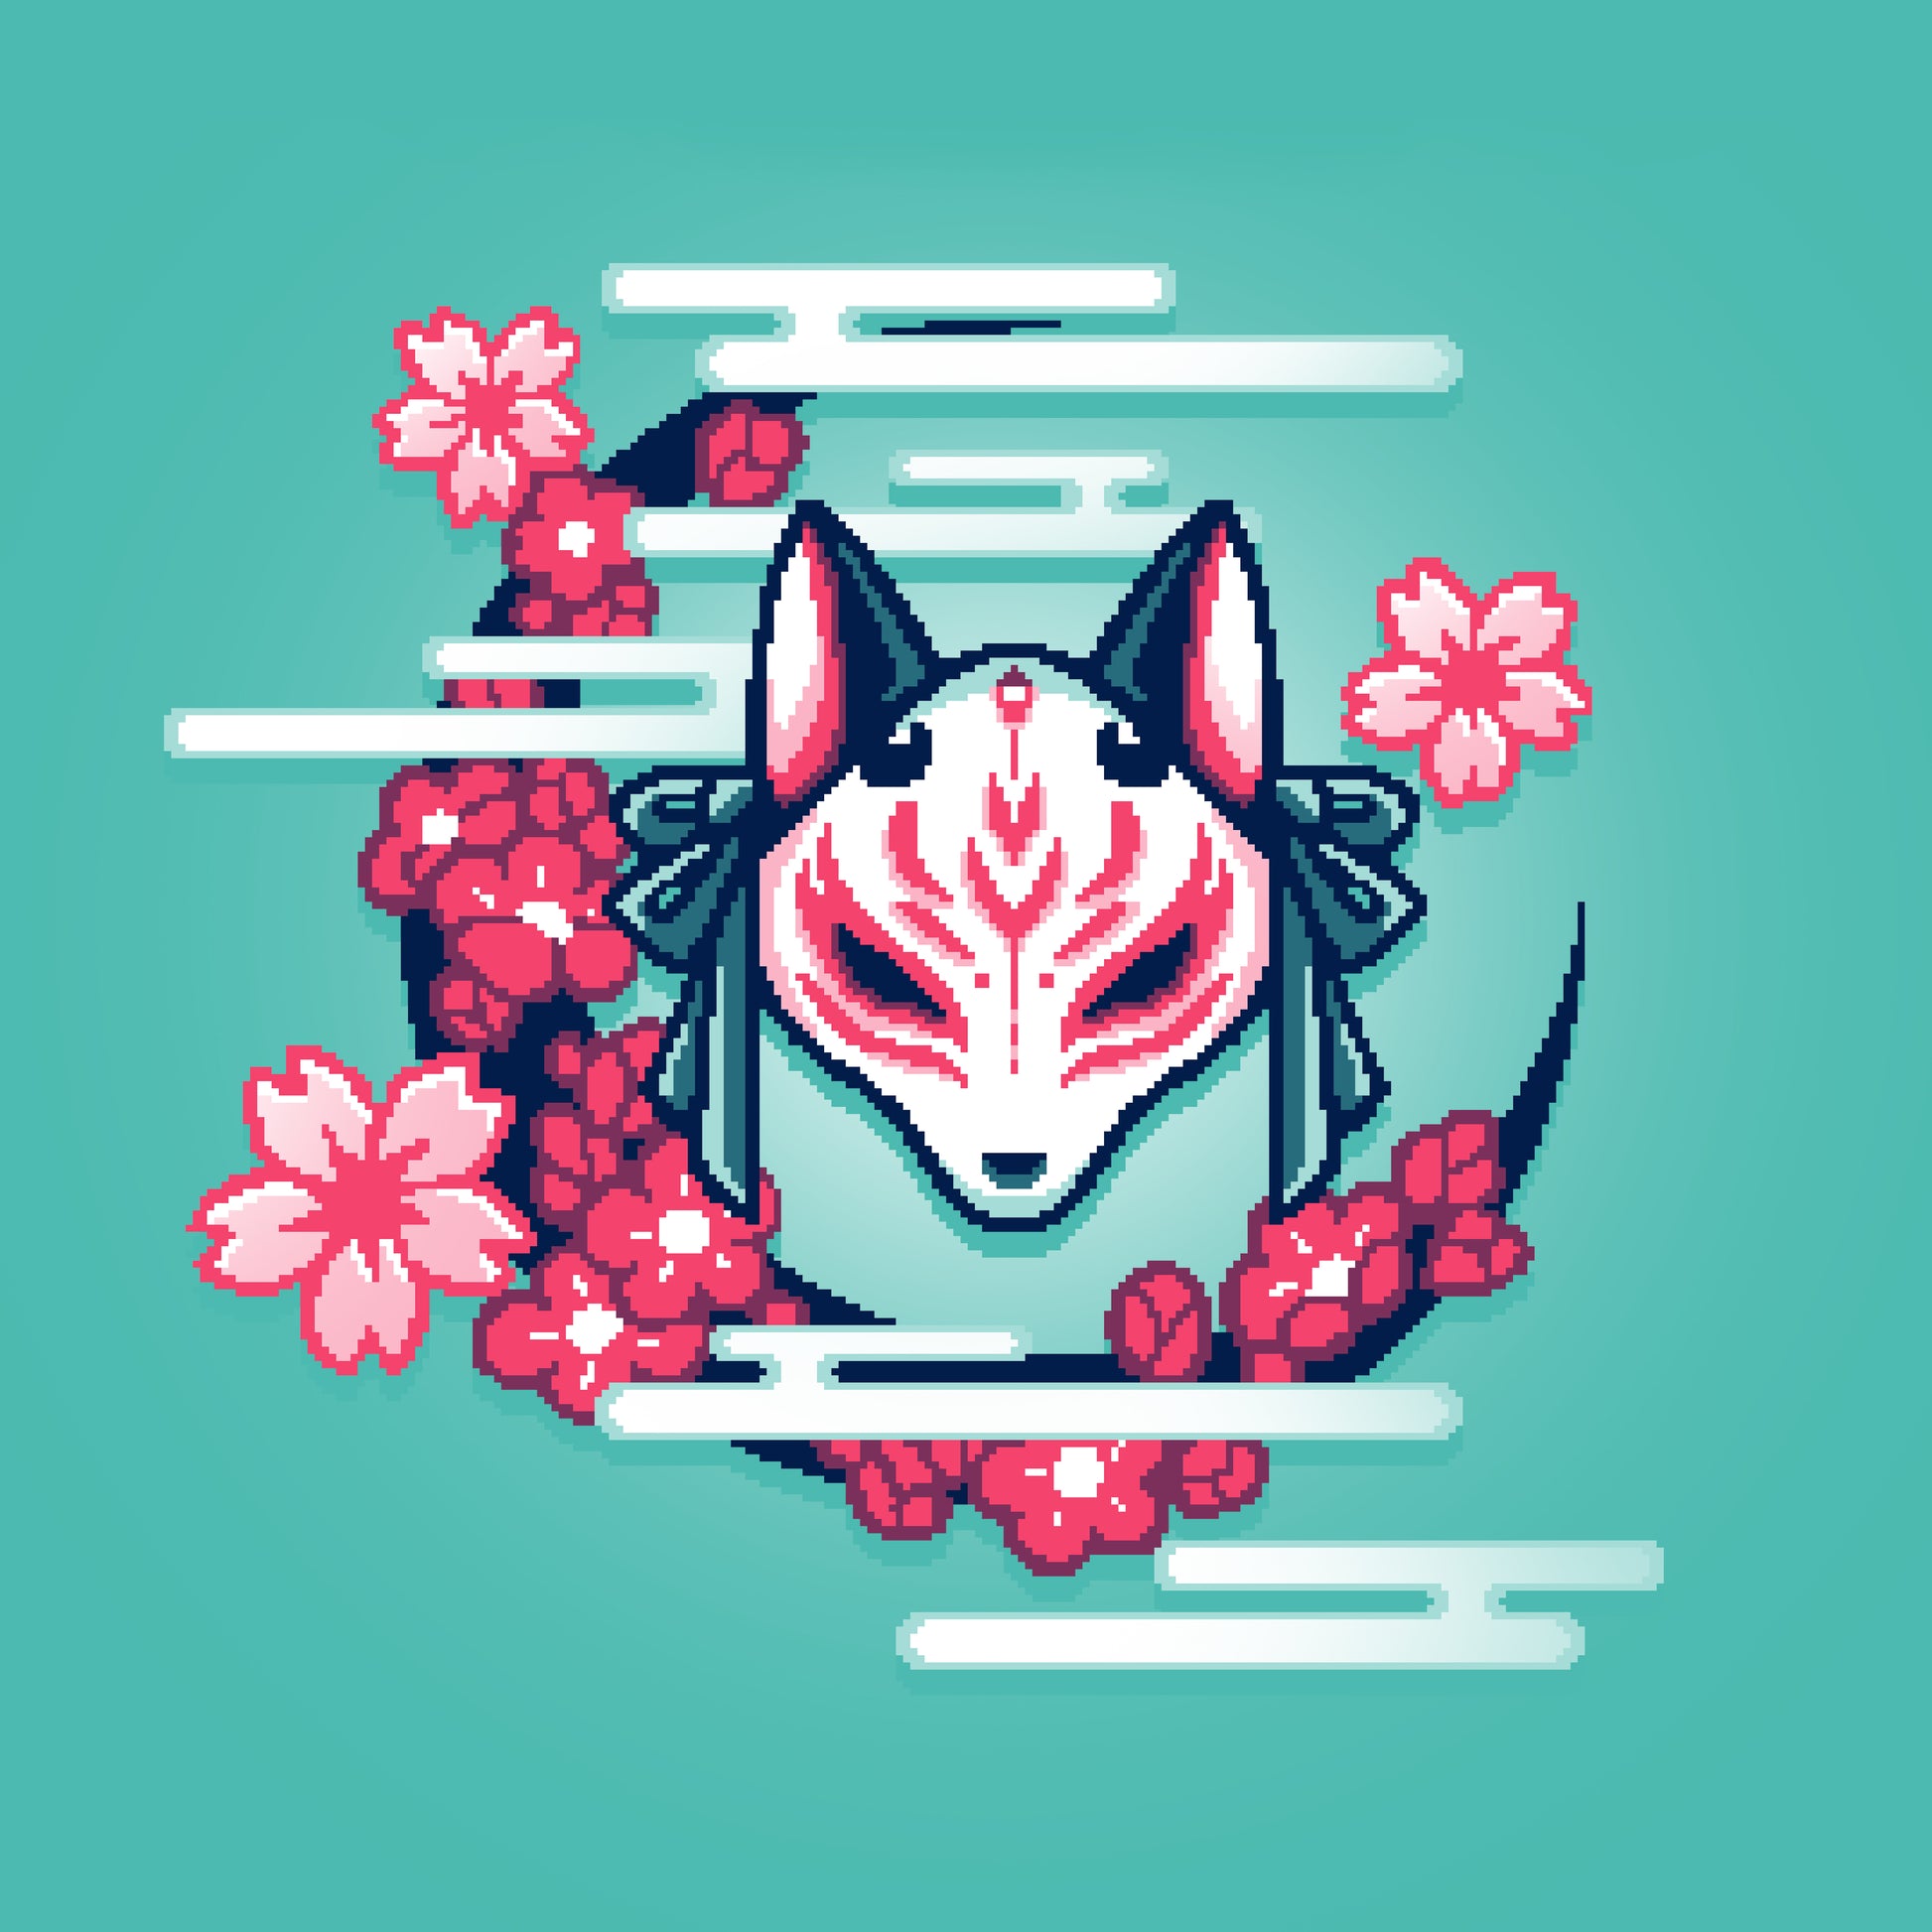 Japanese fox with cherry blossoms against a Caribbean Blue background. Perfect for Kitsune Mask Pixel Art by TeeTurtle tees!